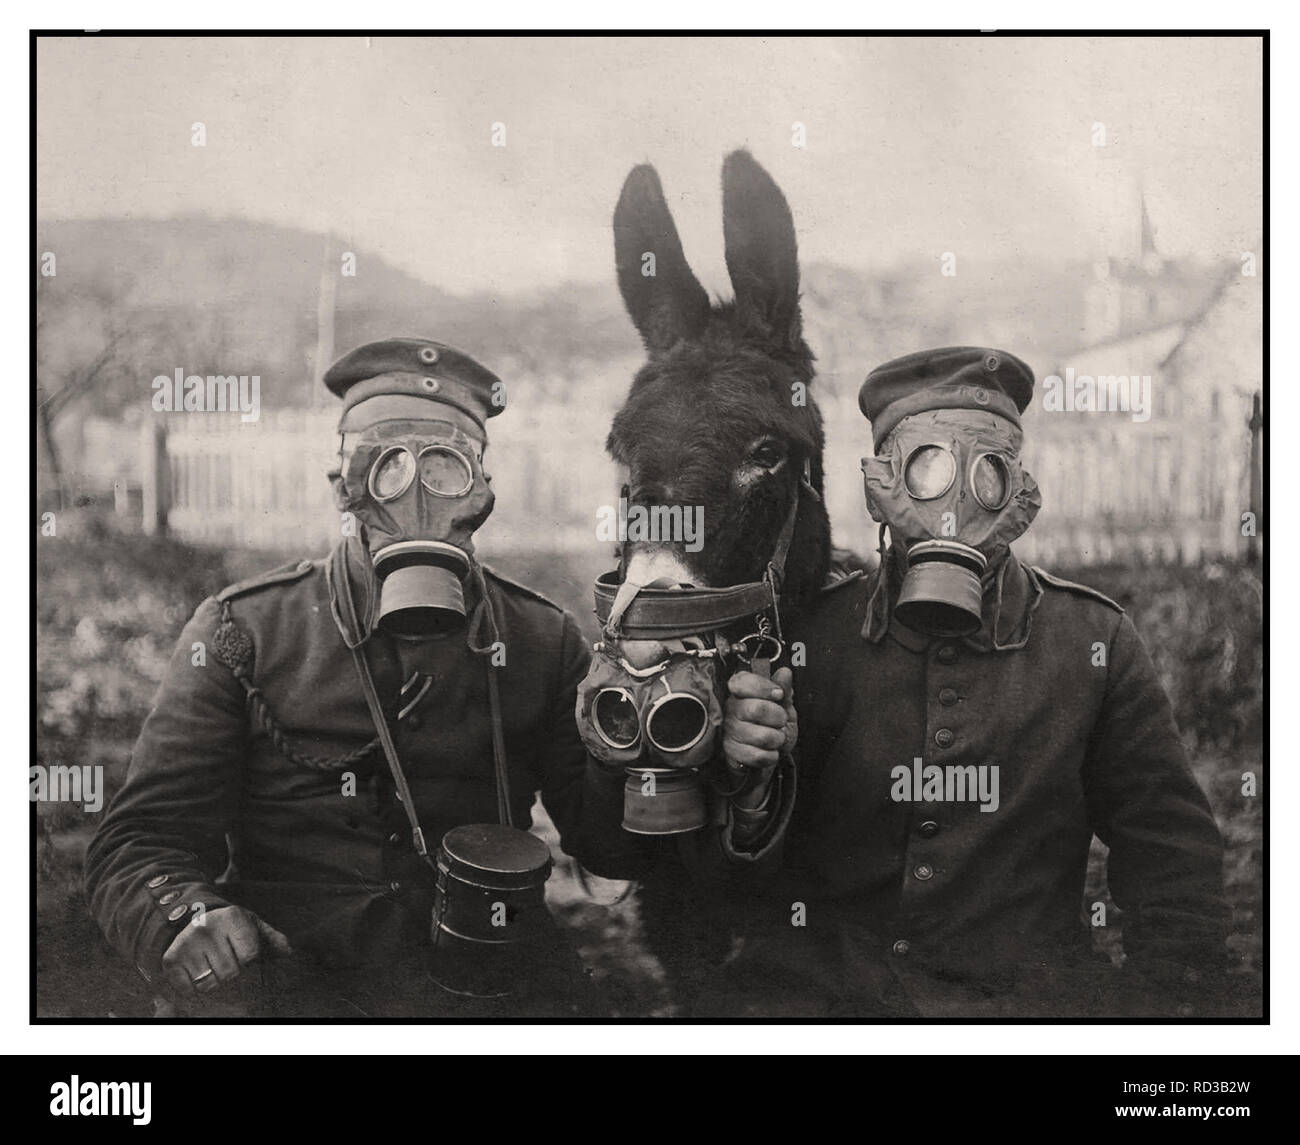 WW1 Gas Masks Vintage B&W stark image of German soldiers and their mule wearing gas masks in WWI 1916. Gases used included chlorine, mustard gas, bromine and phosgene, World War 1 First World War Stock Photo